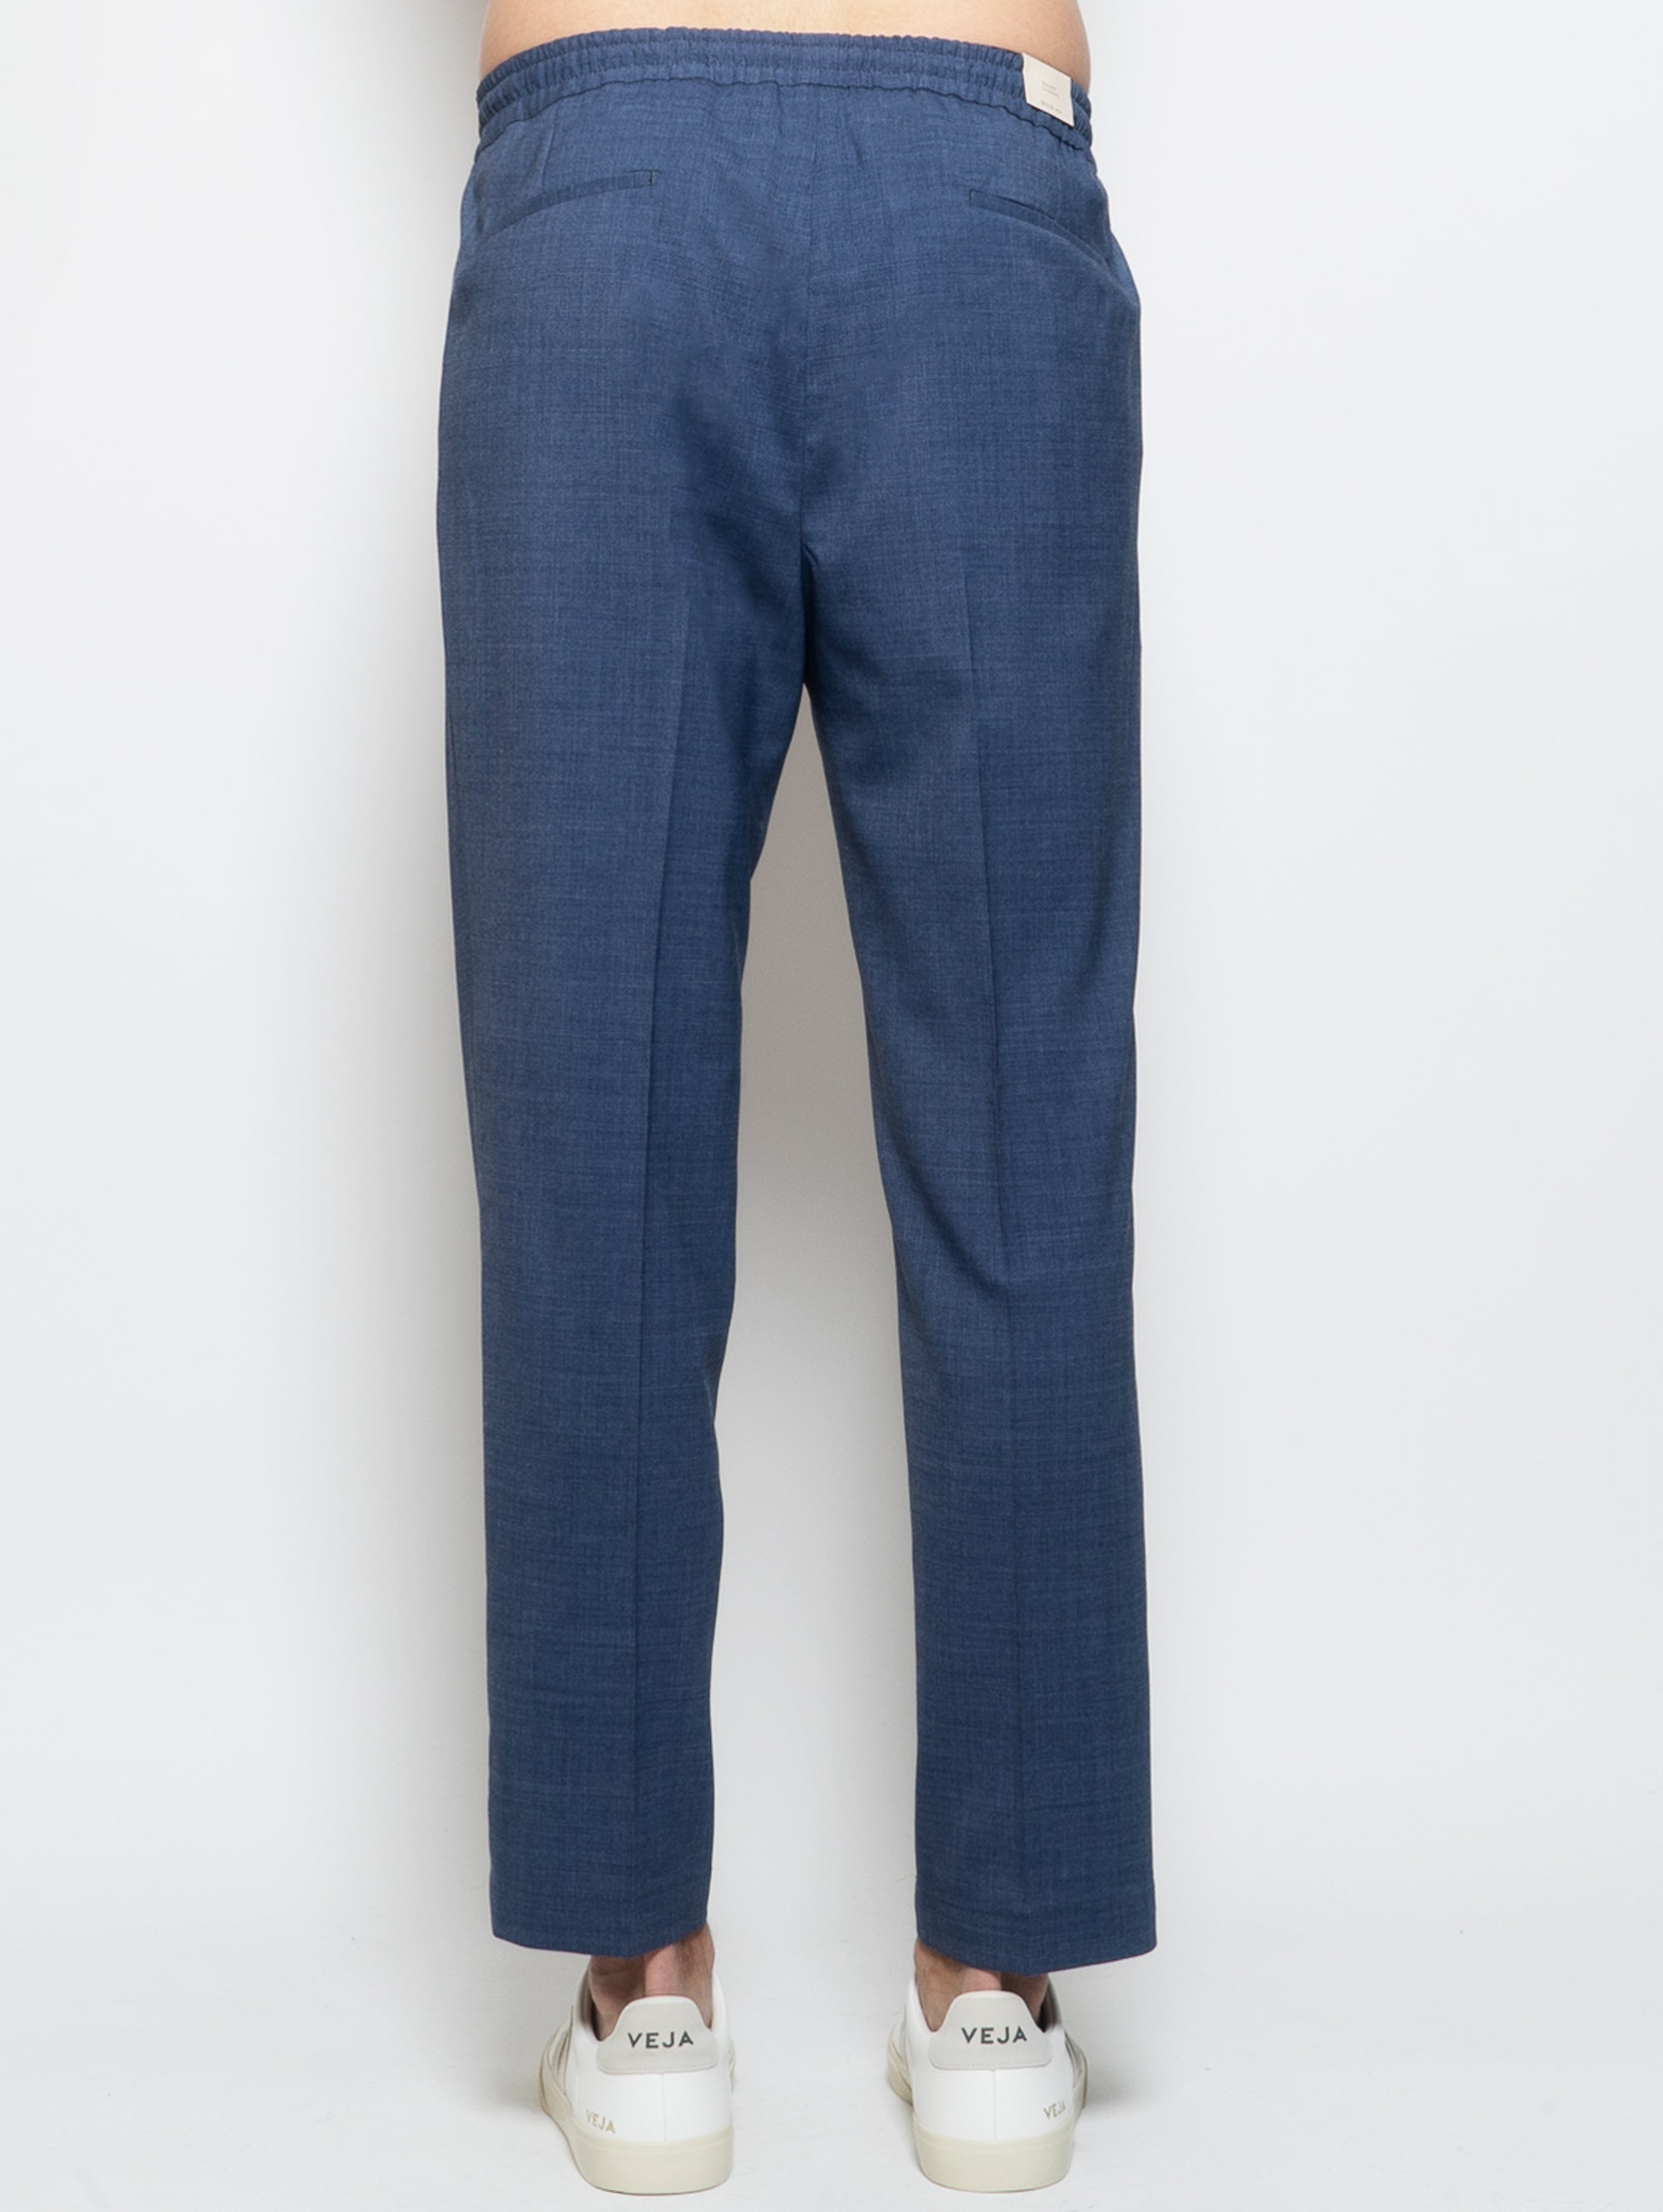 Blue Wool Blend Pants with Drawstring and Pleats